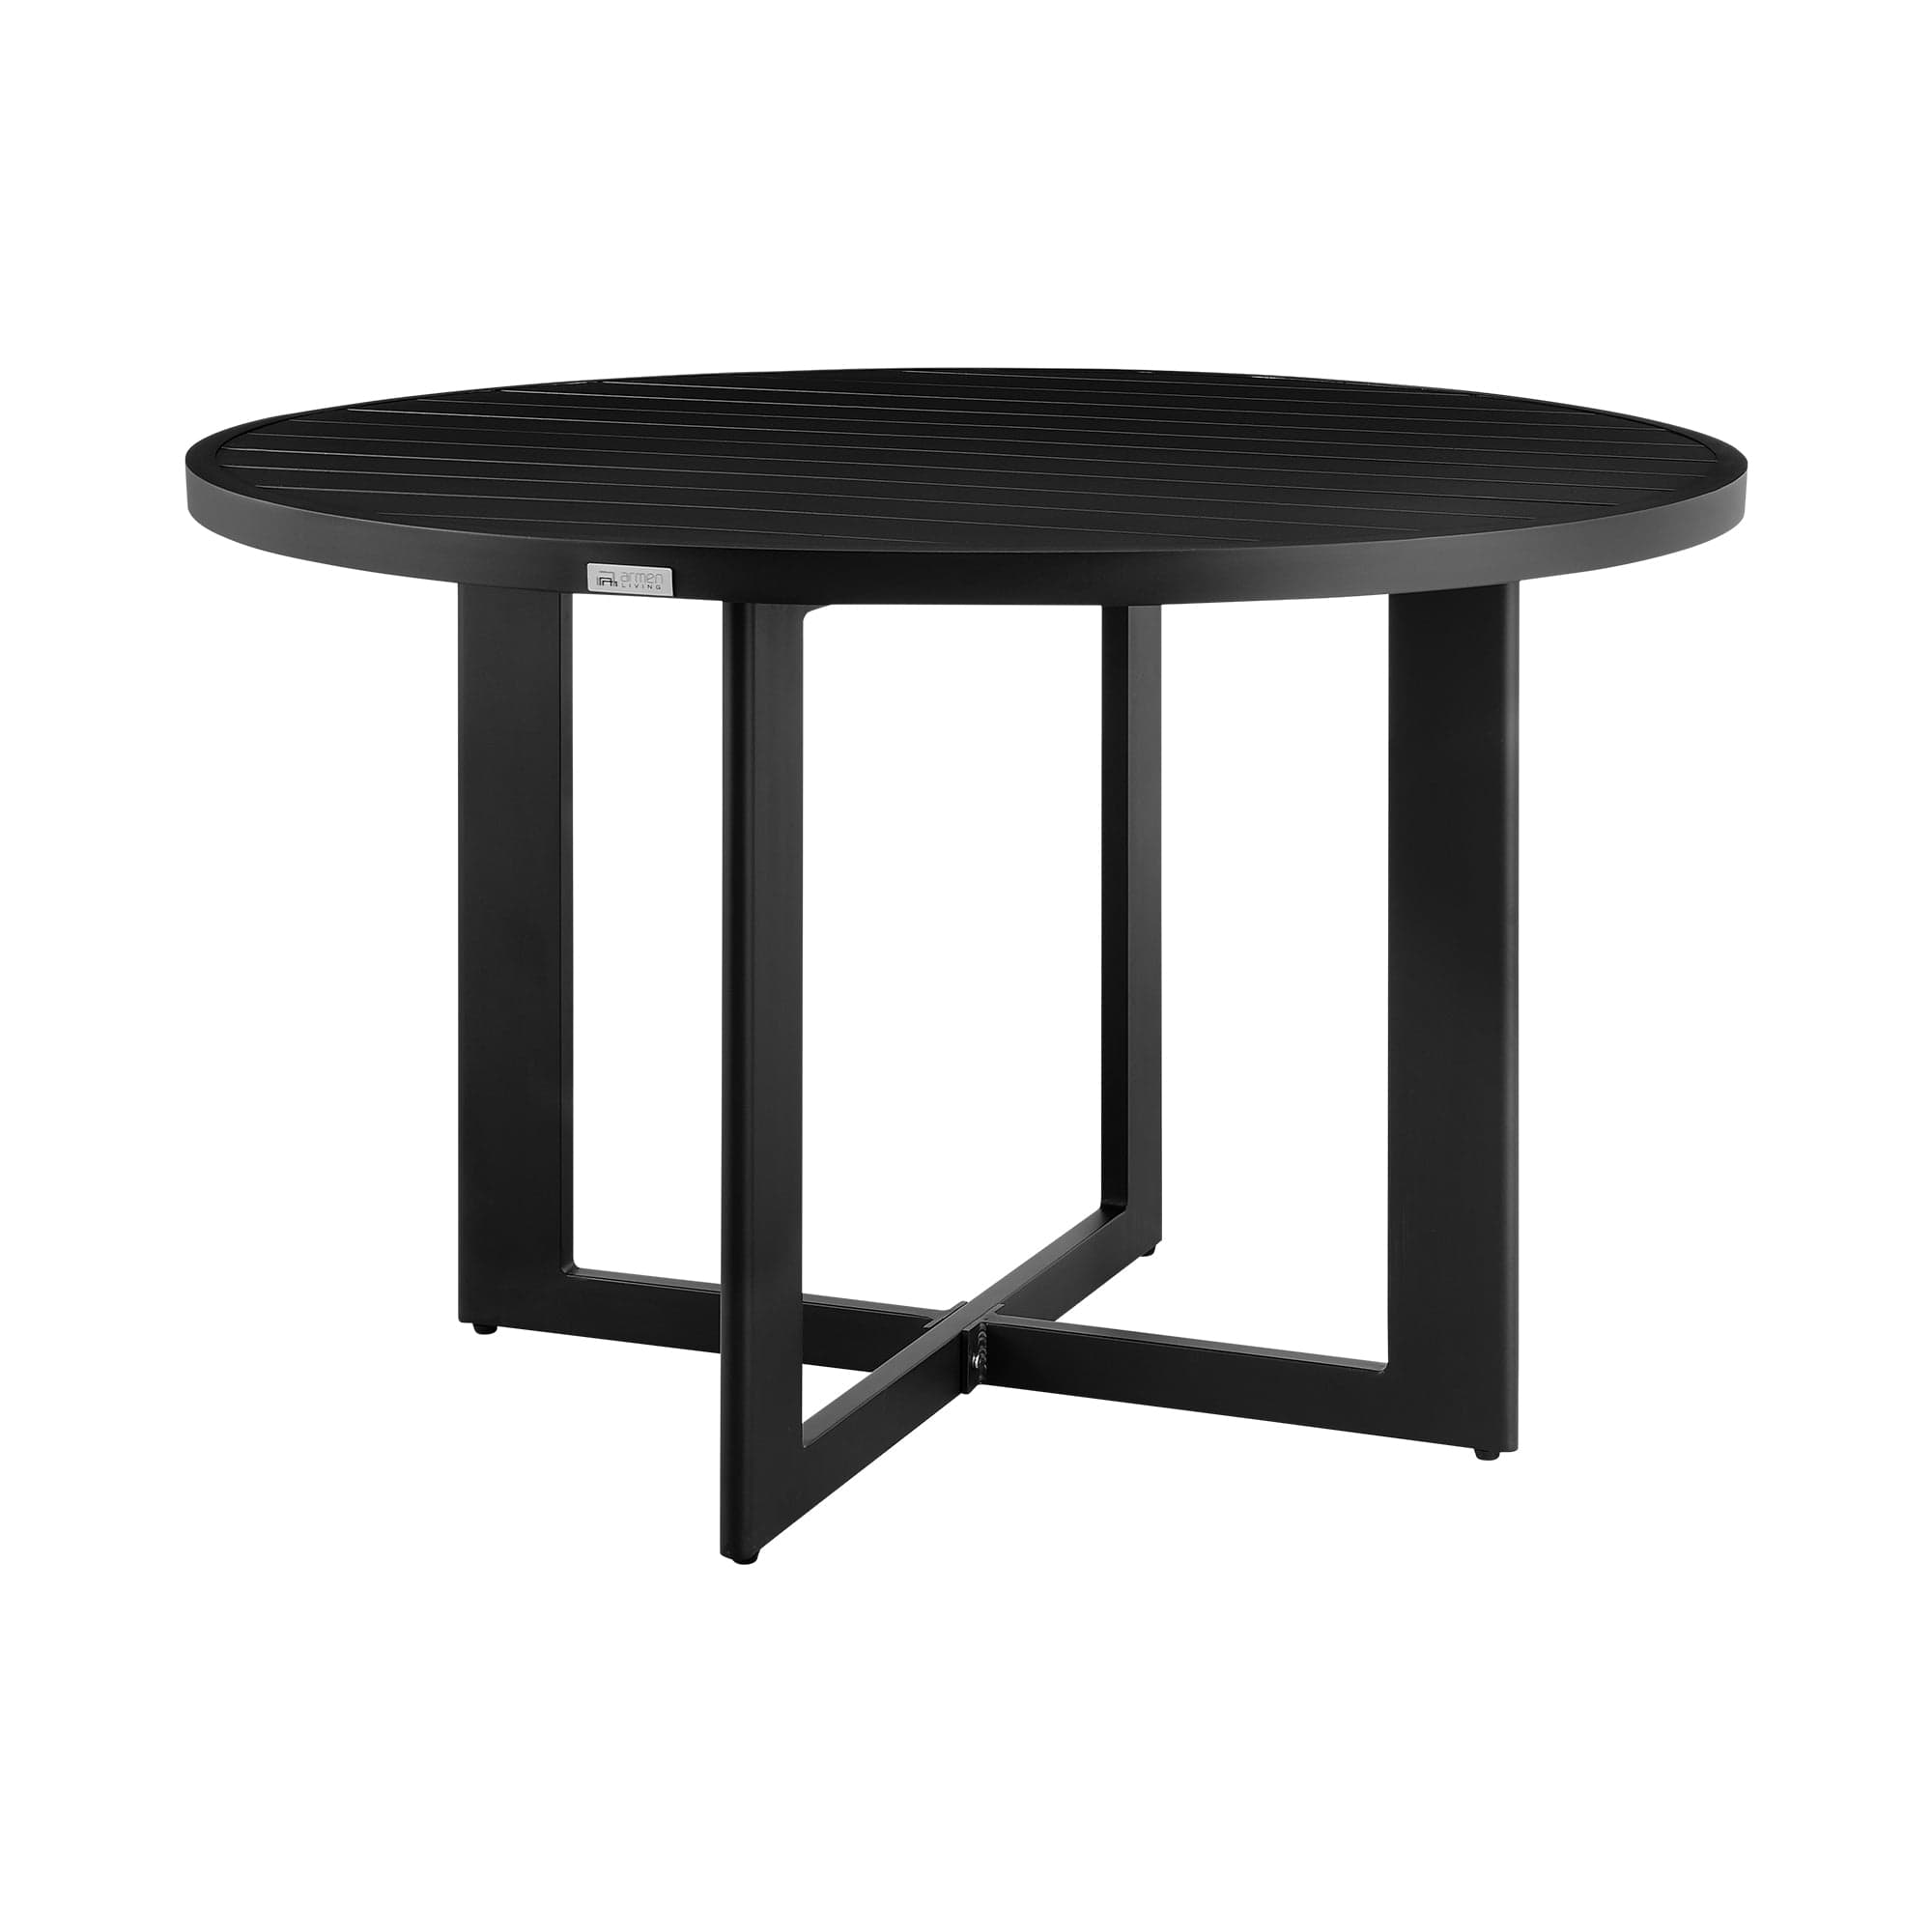 Armen Living Outdoor Dining Table Armen Living | Cayman Outdoor Patio Round Dining Table in Aluminum | LCCCDIRDBL